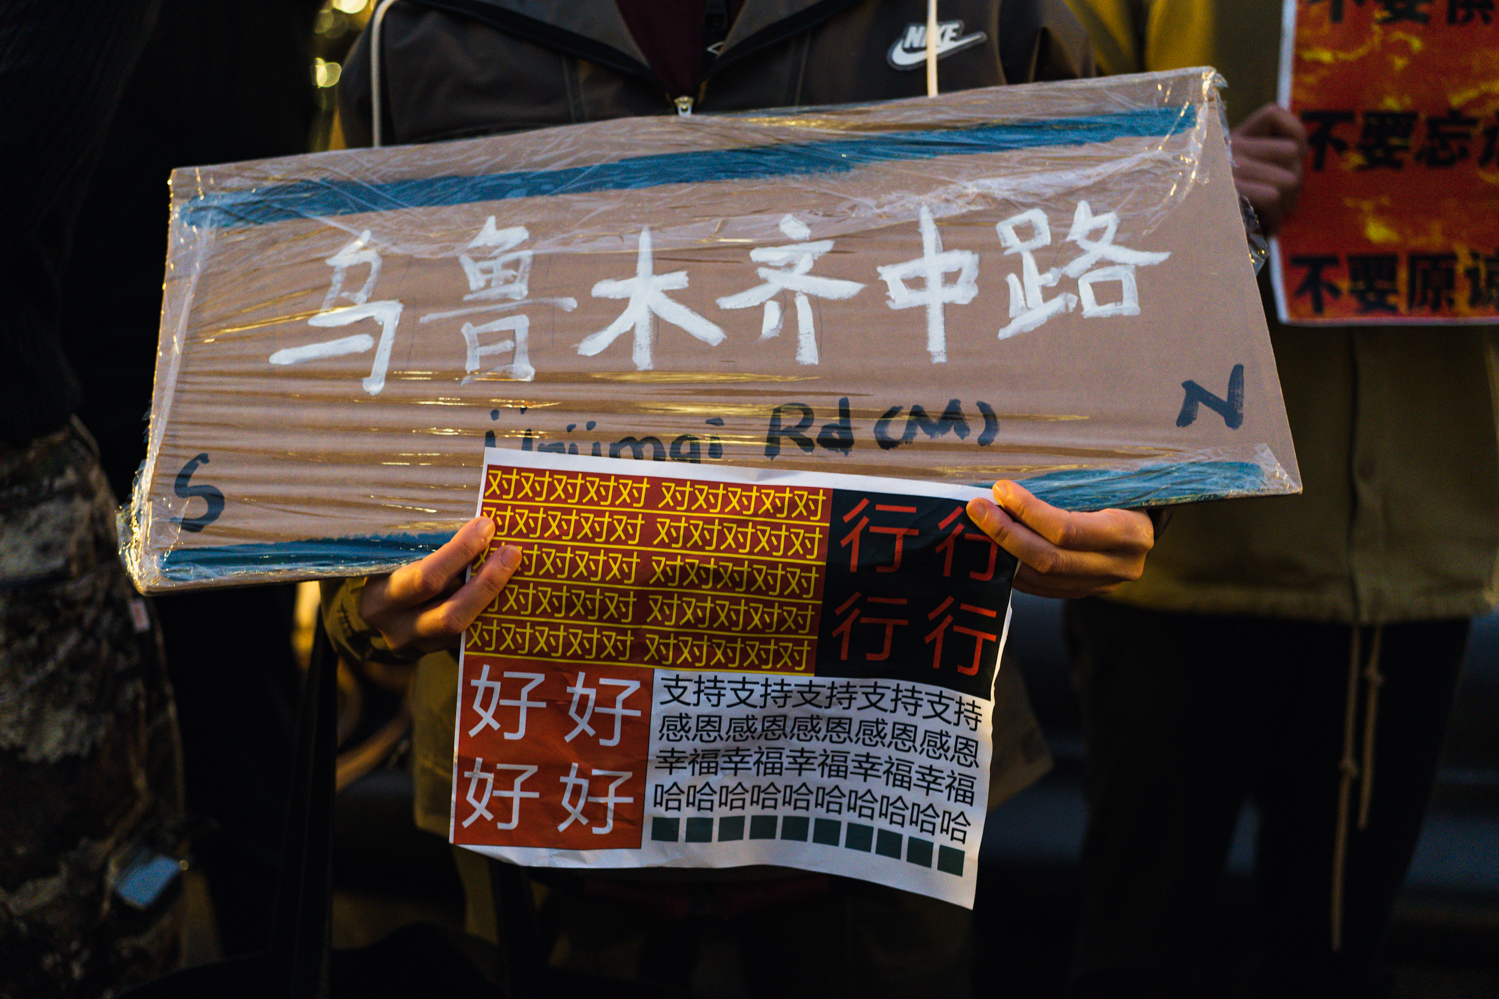 A person holding signs that read “Ürümqi Rd(M)” and “yes, ok, nice, thank you” in Chinese.